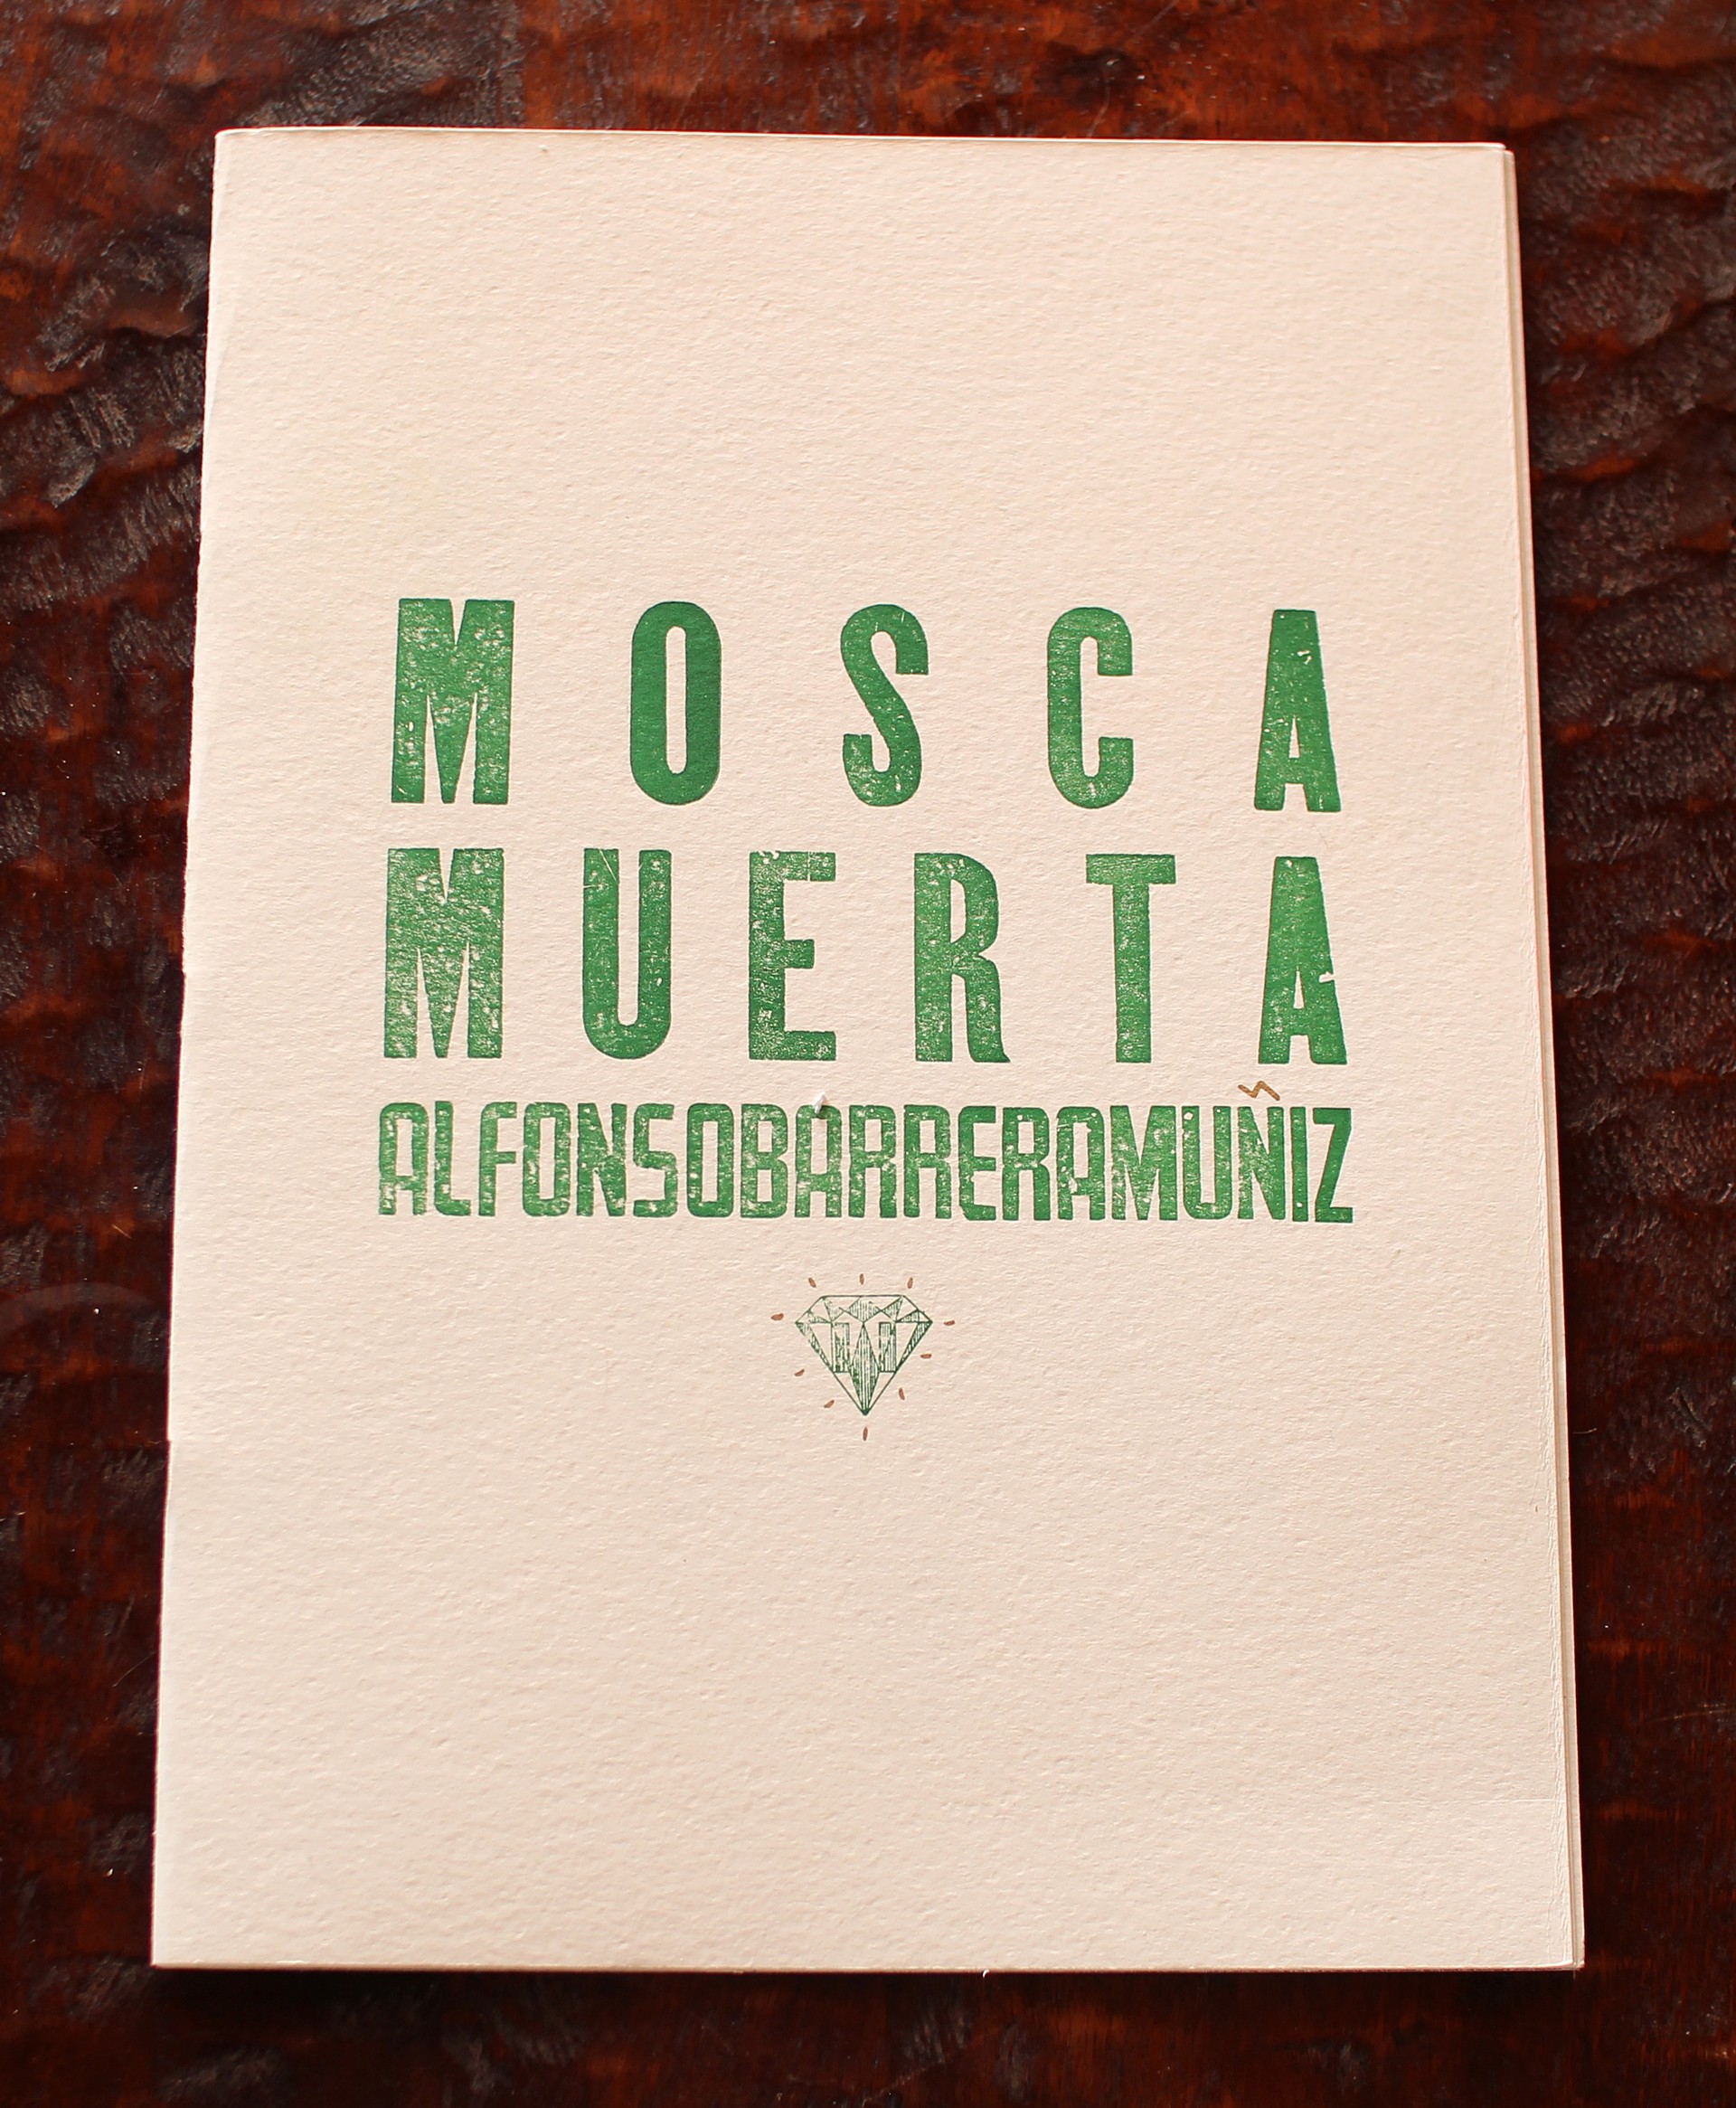 Mosca Muerta by Polvoh Press